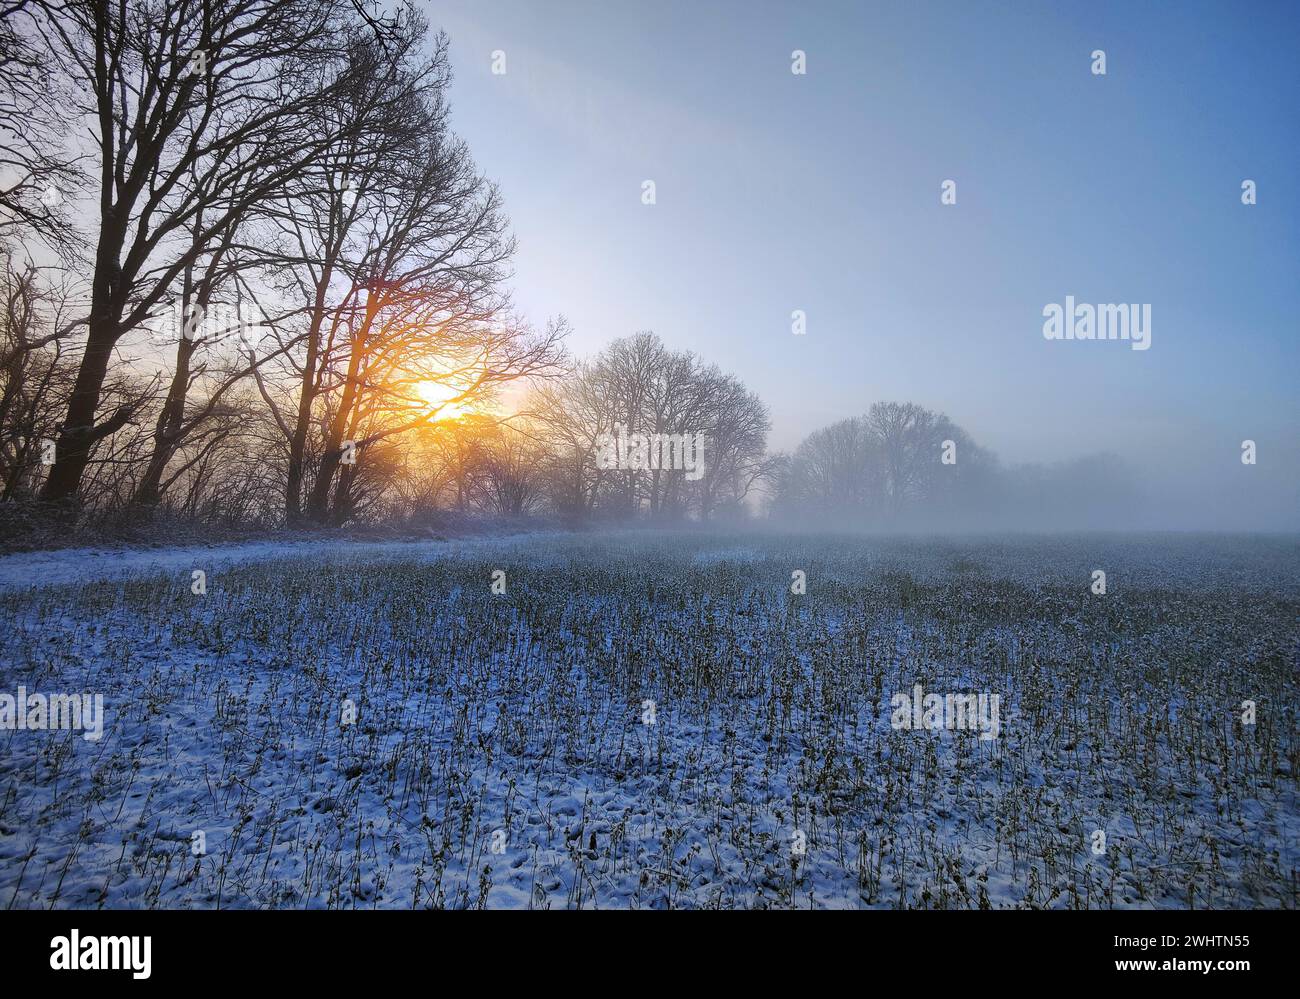 Atmospheric sunrise over a field with fog in winter, Witten, Ruhr area, North Rhine-Westphalia, Germany Stock Photo